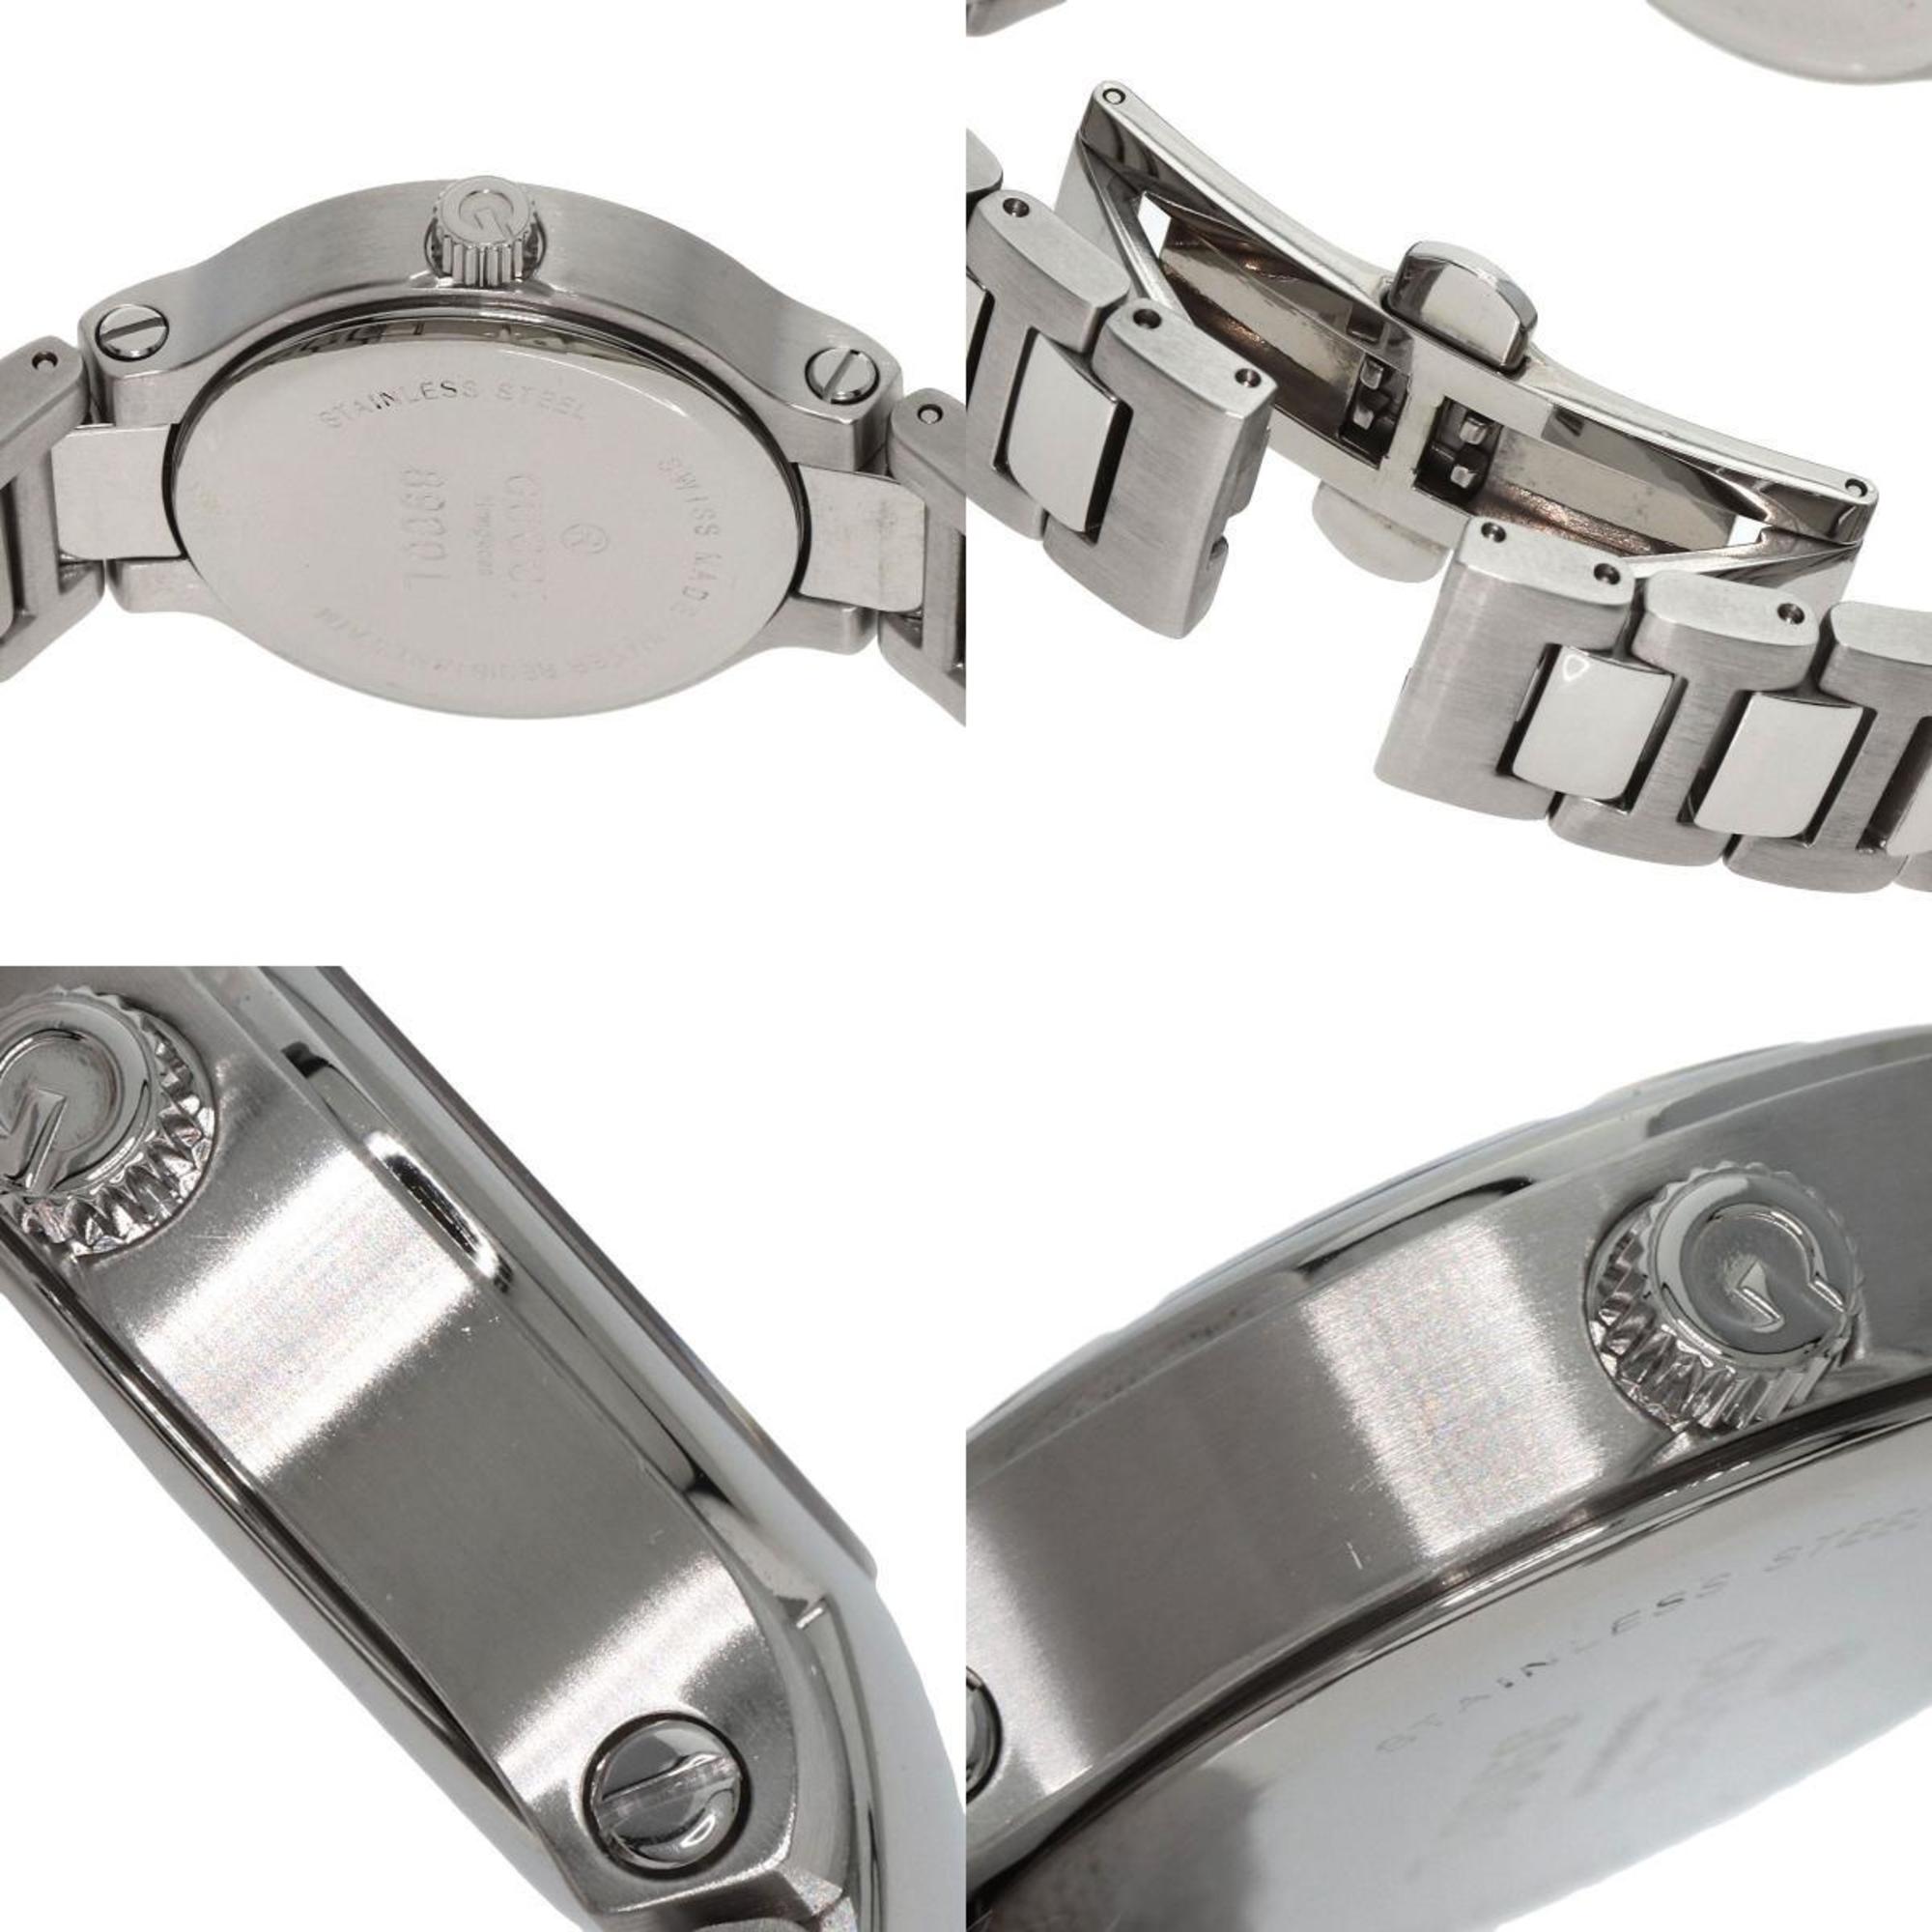 Gucci 8900L Watch Stainless Steel/SS Ladies GUCCI